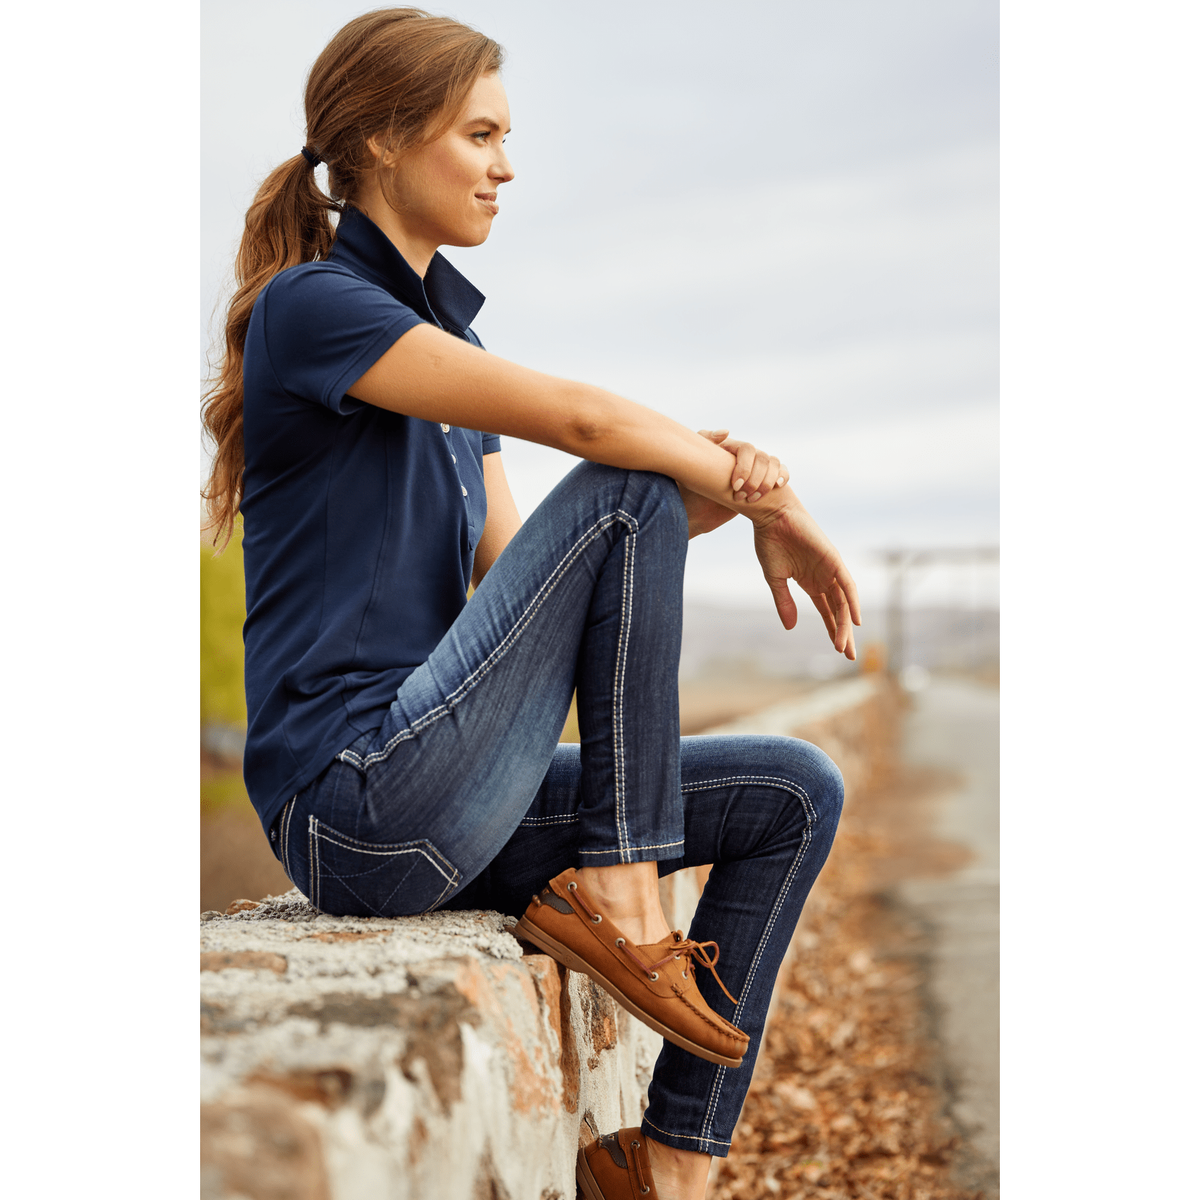 ARIAT CLOTHING 29 Ariat Wms Real Mid Rise Skinny Ella Jeans